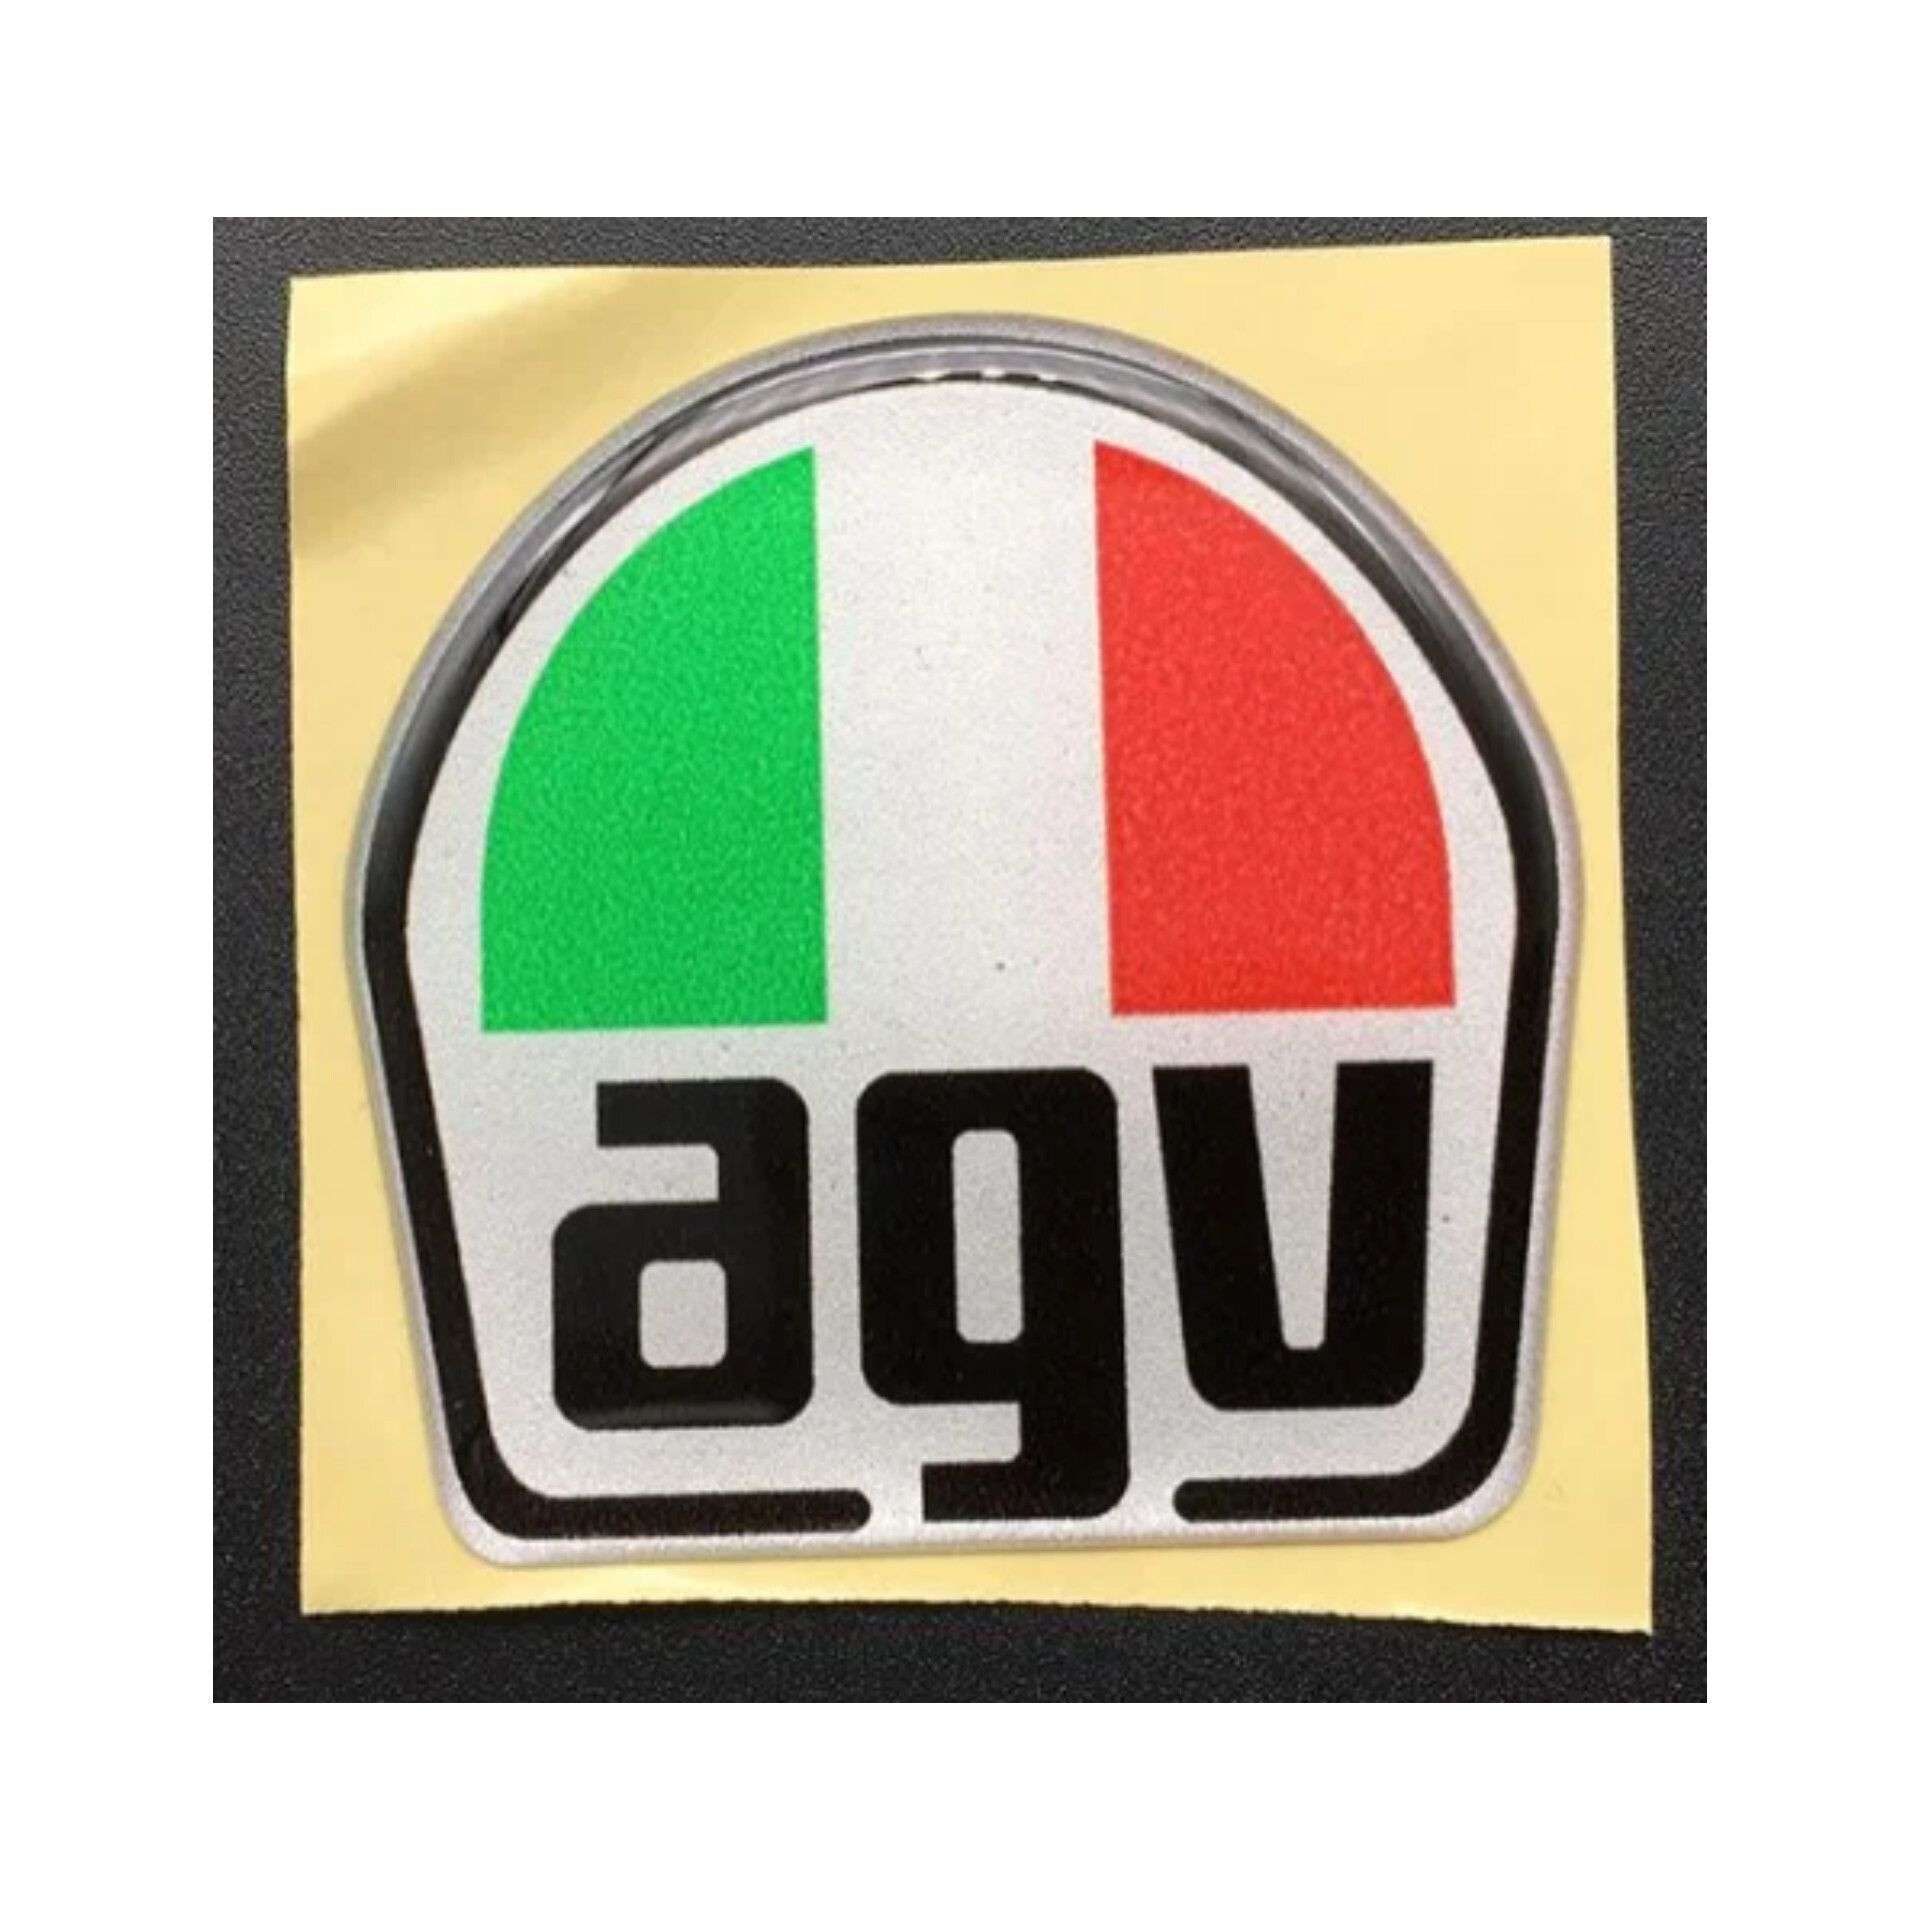 AGV facts: here's how to install Pinlock®